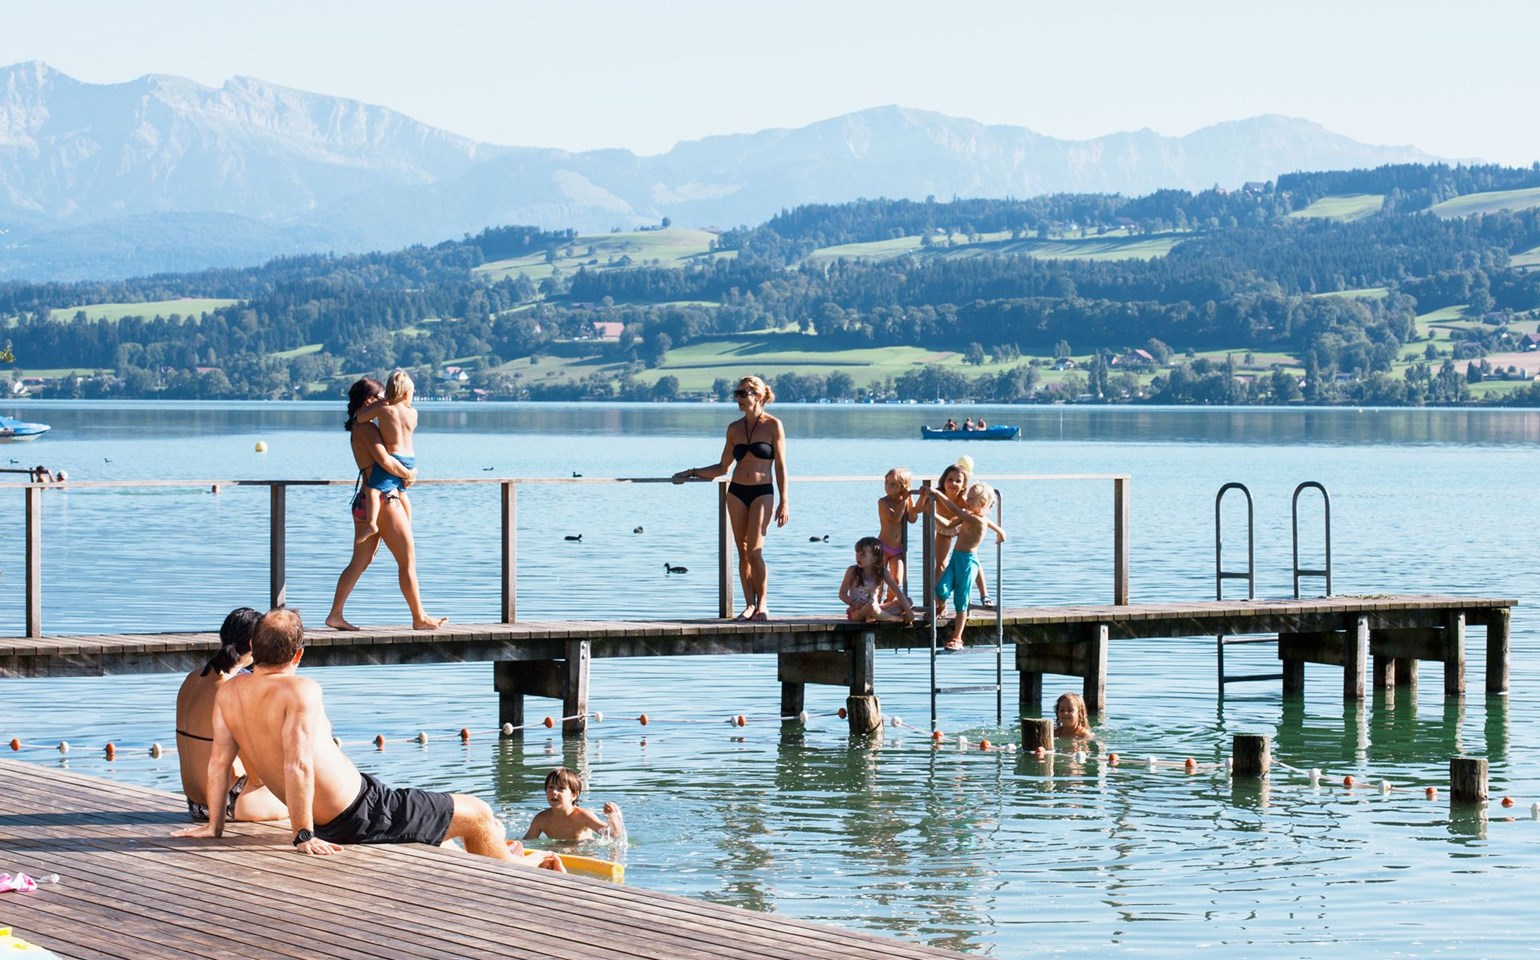 Swimming opportunities in Lake Sepmach, Sonne Seehotel Eich